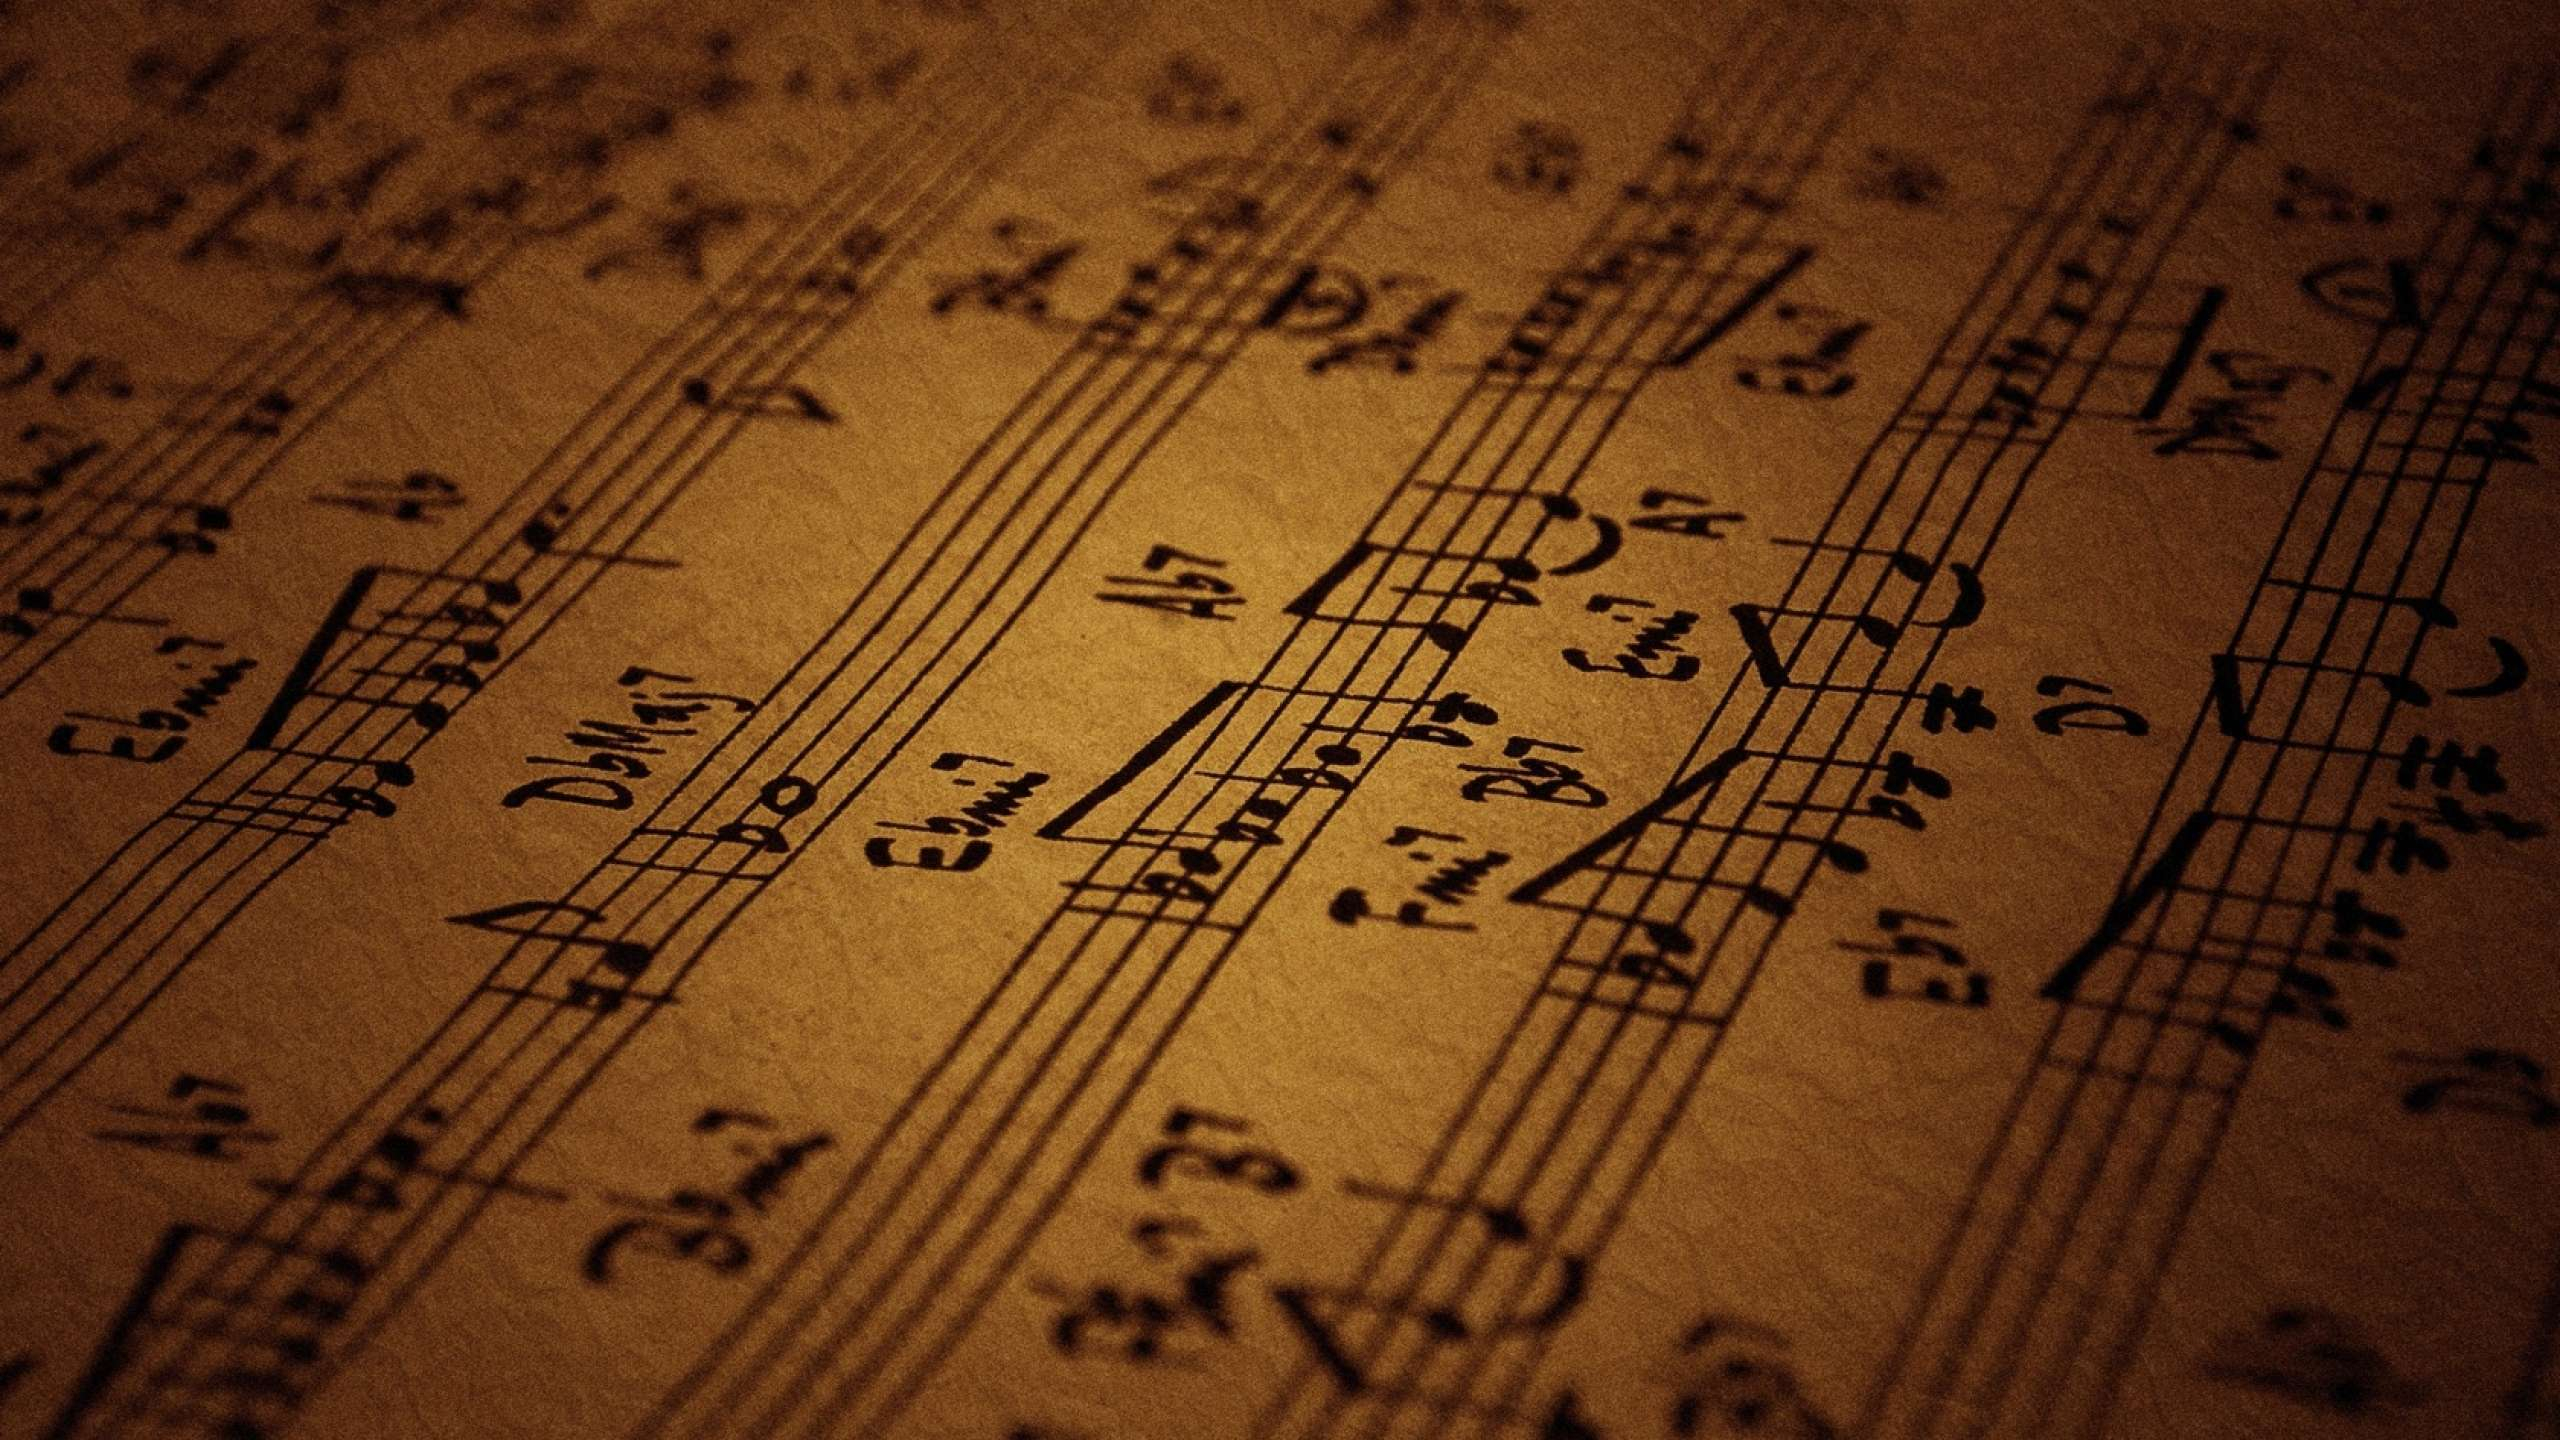 2560x1440 Free download Music Note Wallpapers [] for your Desktop, Mobile \u0026 Tablet | Explore 72+ Music Note Wallpaper | Musical Wallpaper for Rooms, Wallpaper Borders Musical Notes, Blue Music Notes Wallpaper